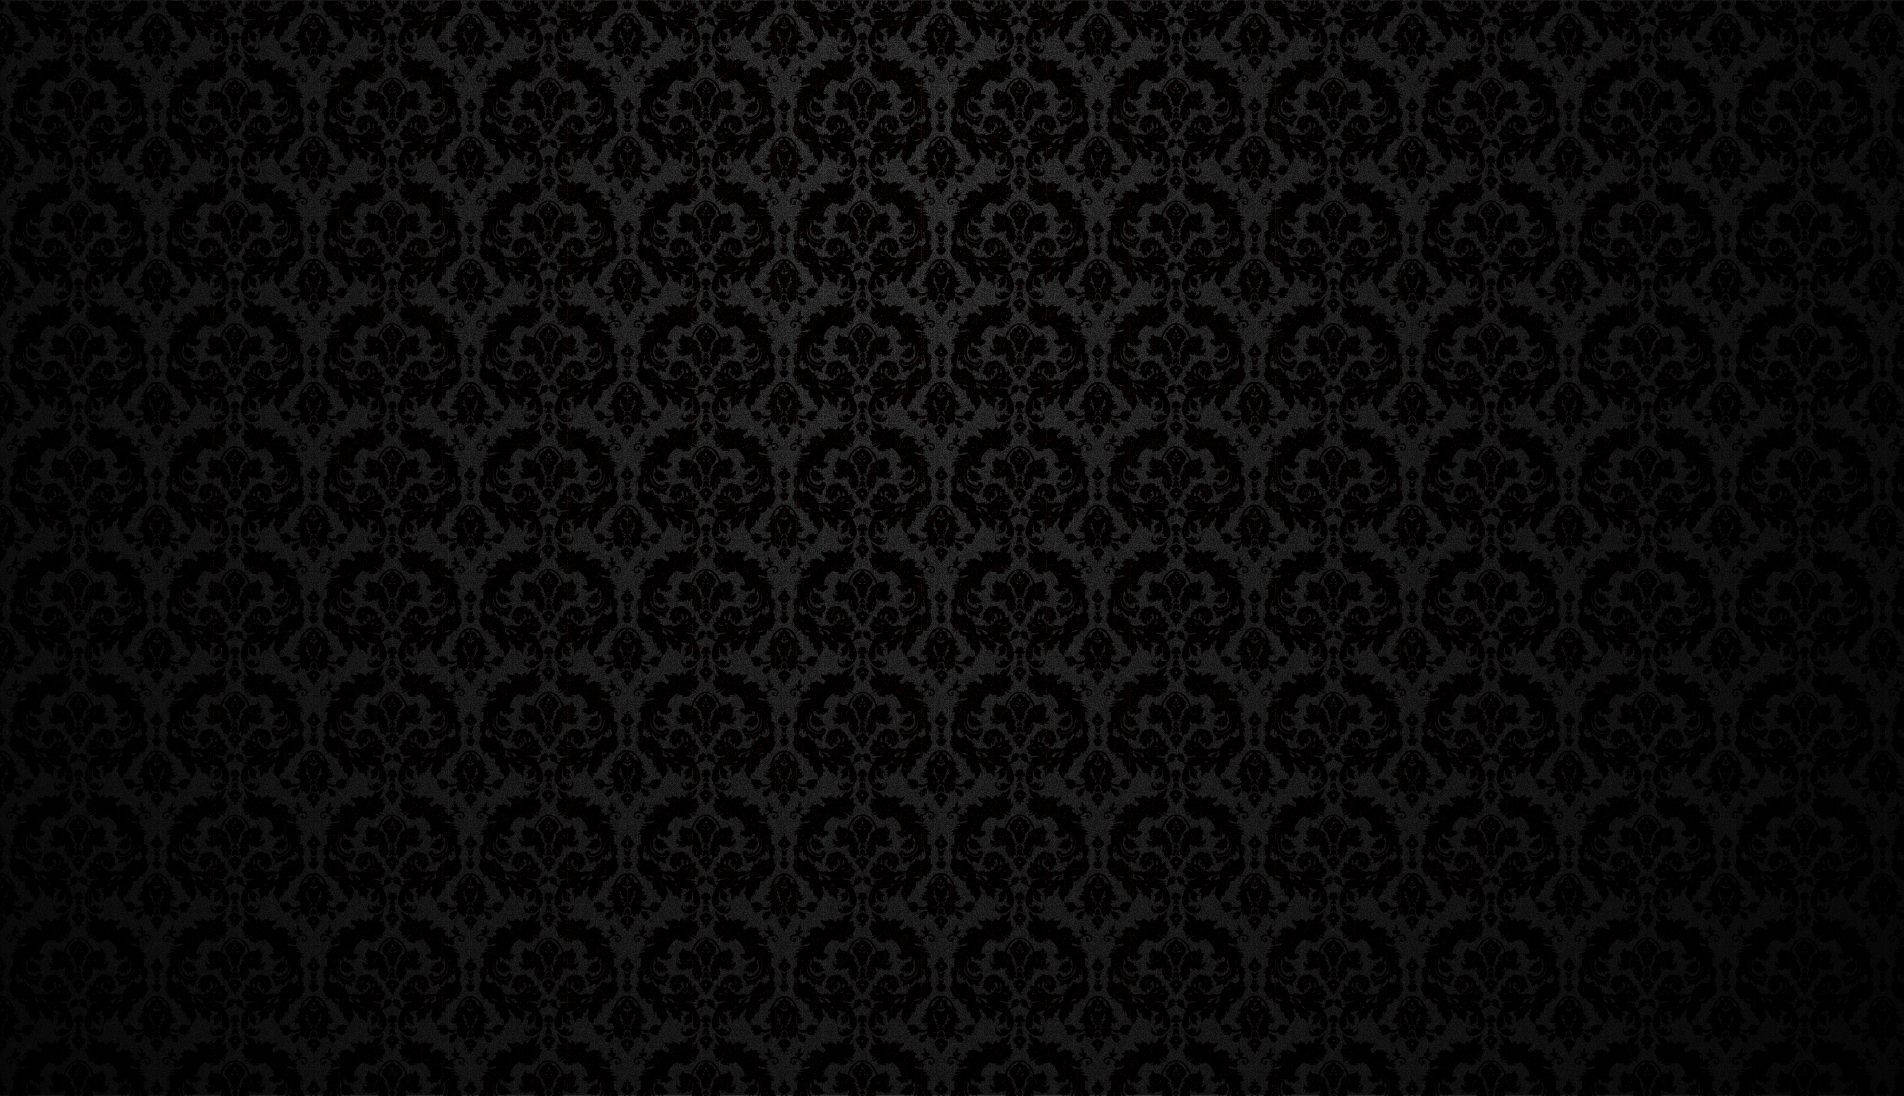 Luxuriously vibrant Black and Gold wallpaper Wallpaper